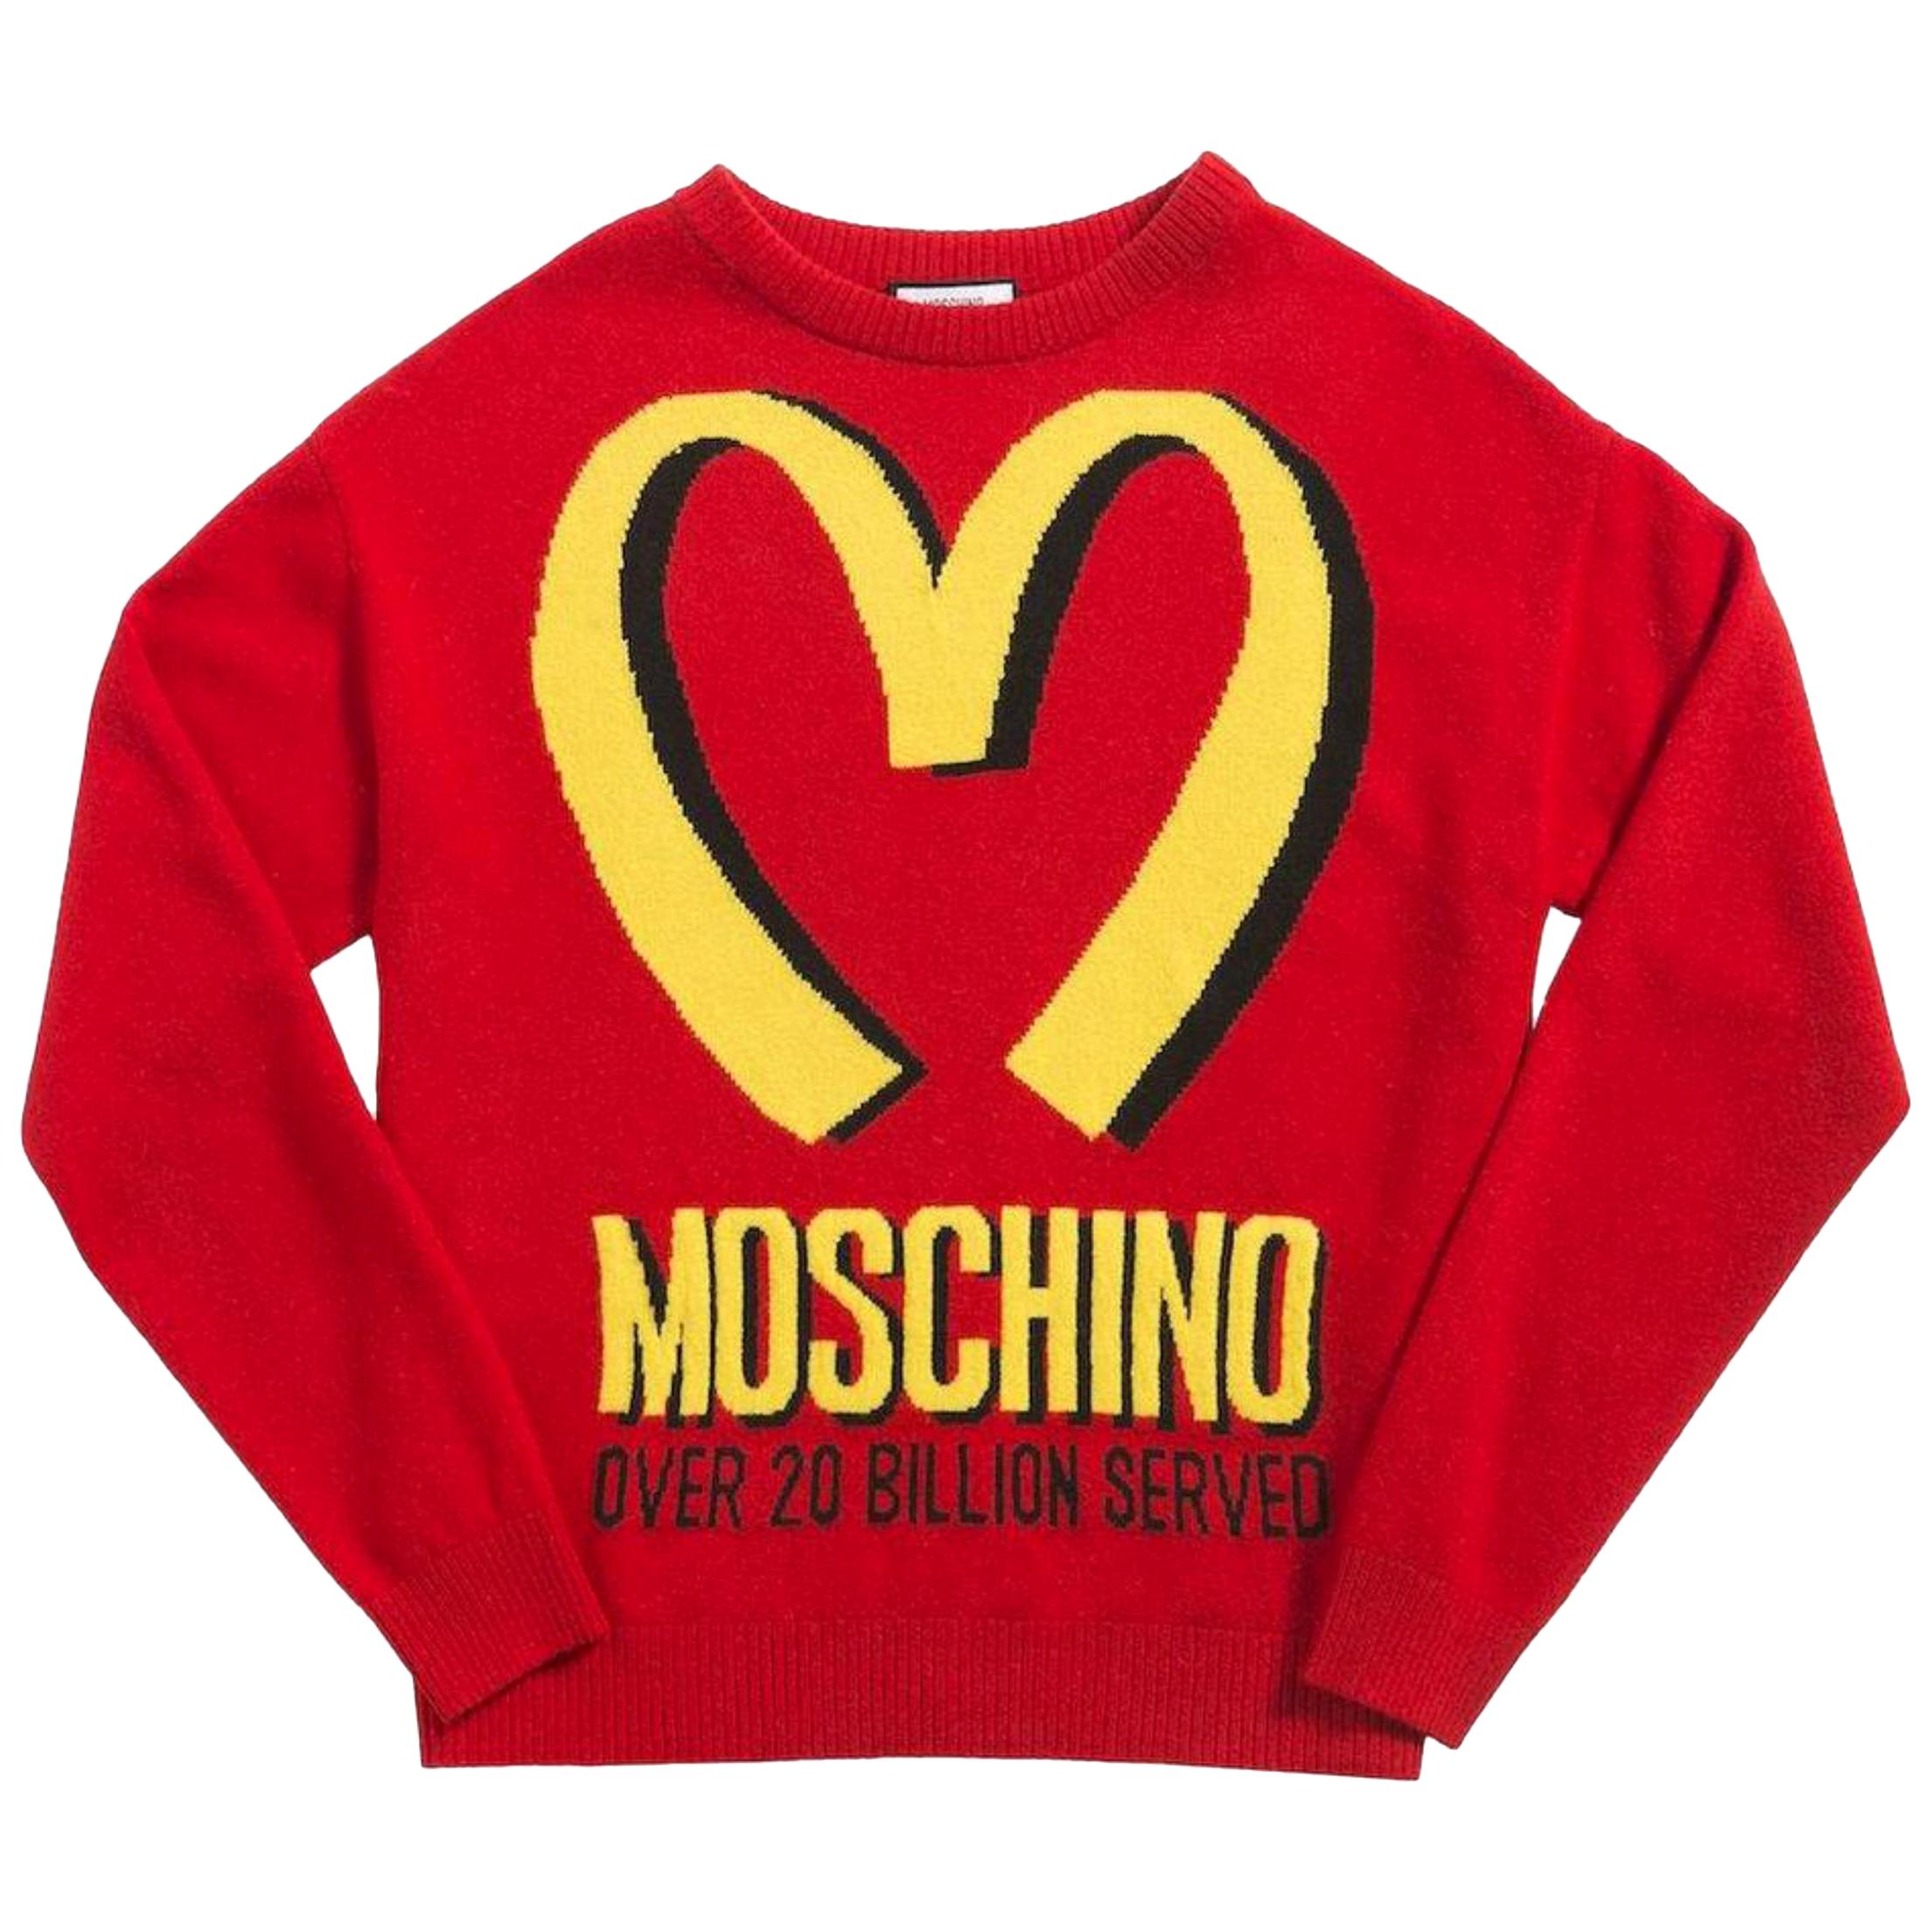 Moschino Jeremy Scott Golden Arches 20 Billion Served 1mj0120 Red Sweater For Sale